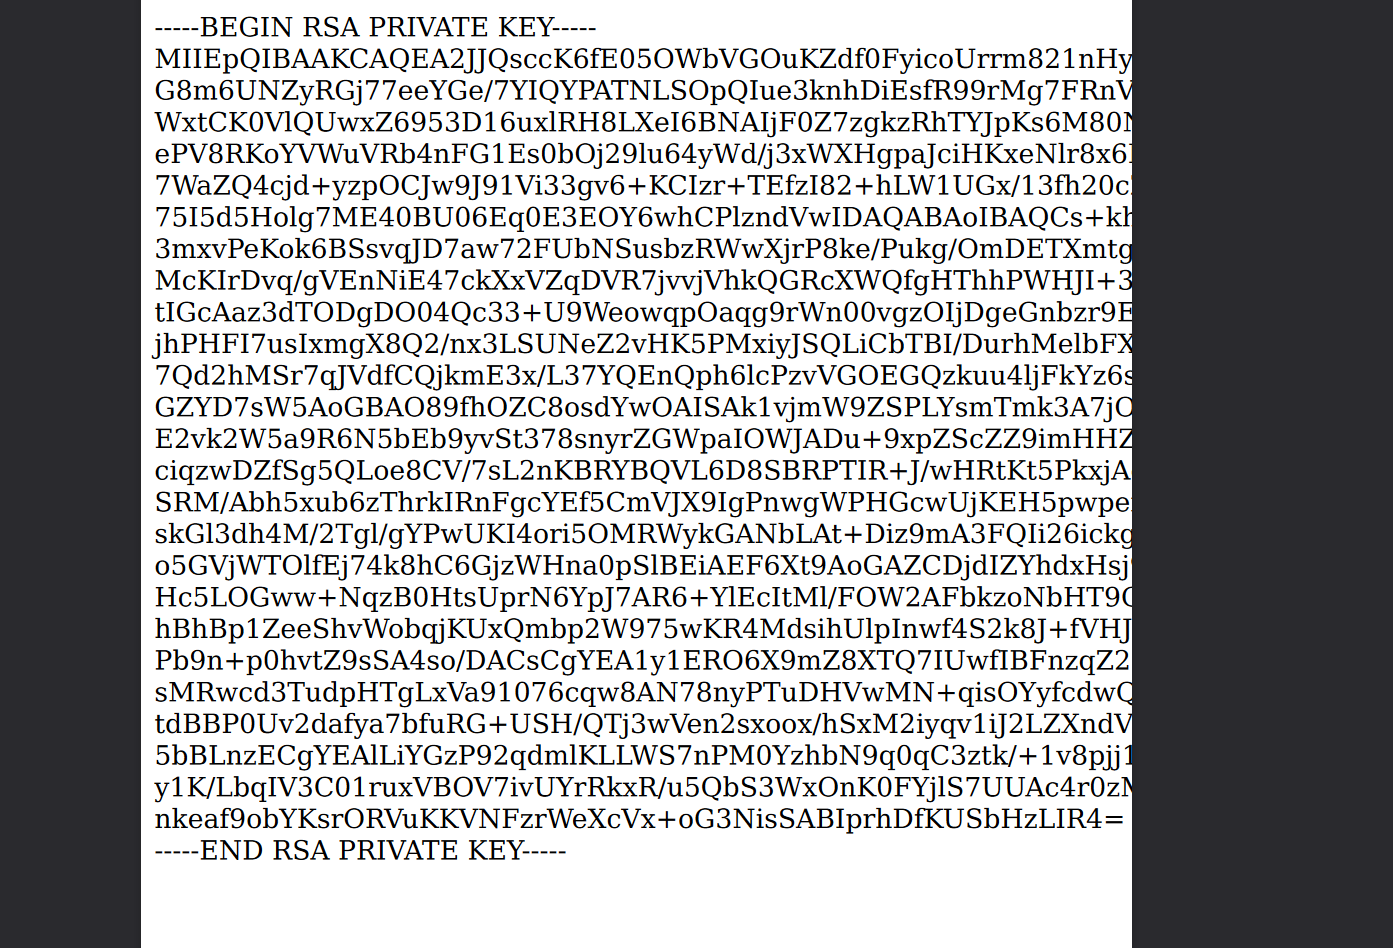 Leaked SSH Private Key